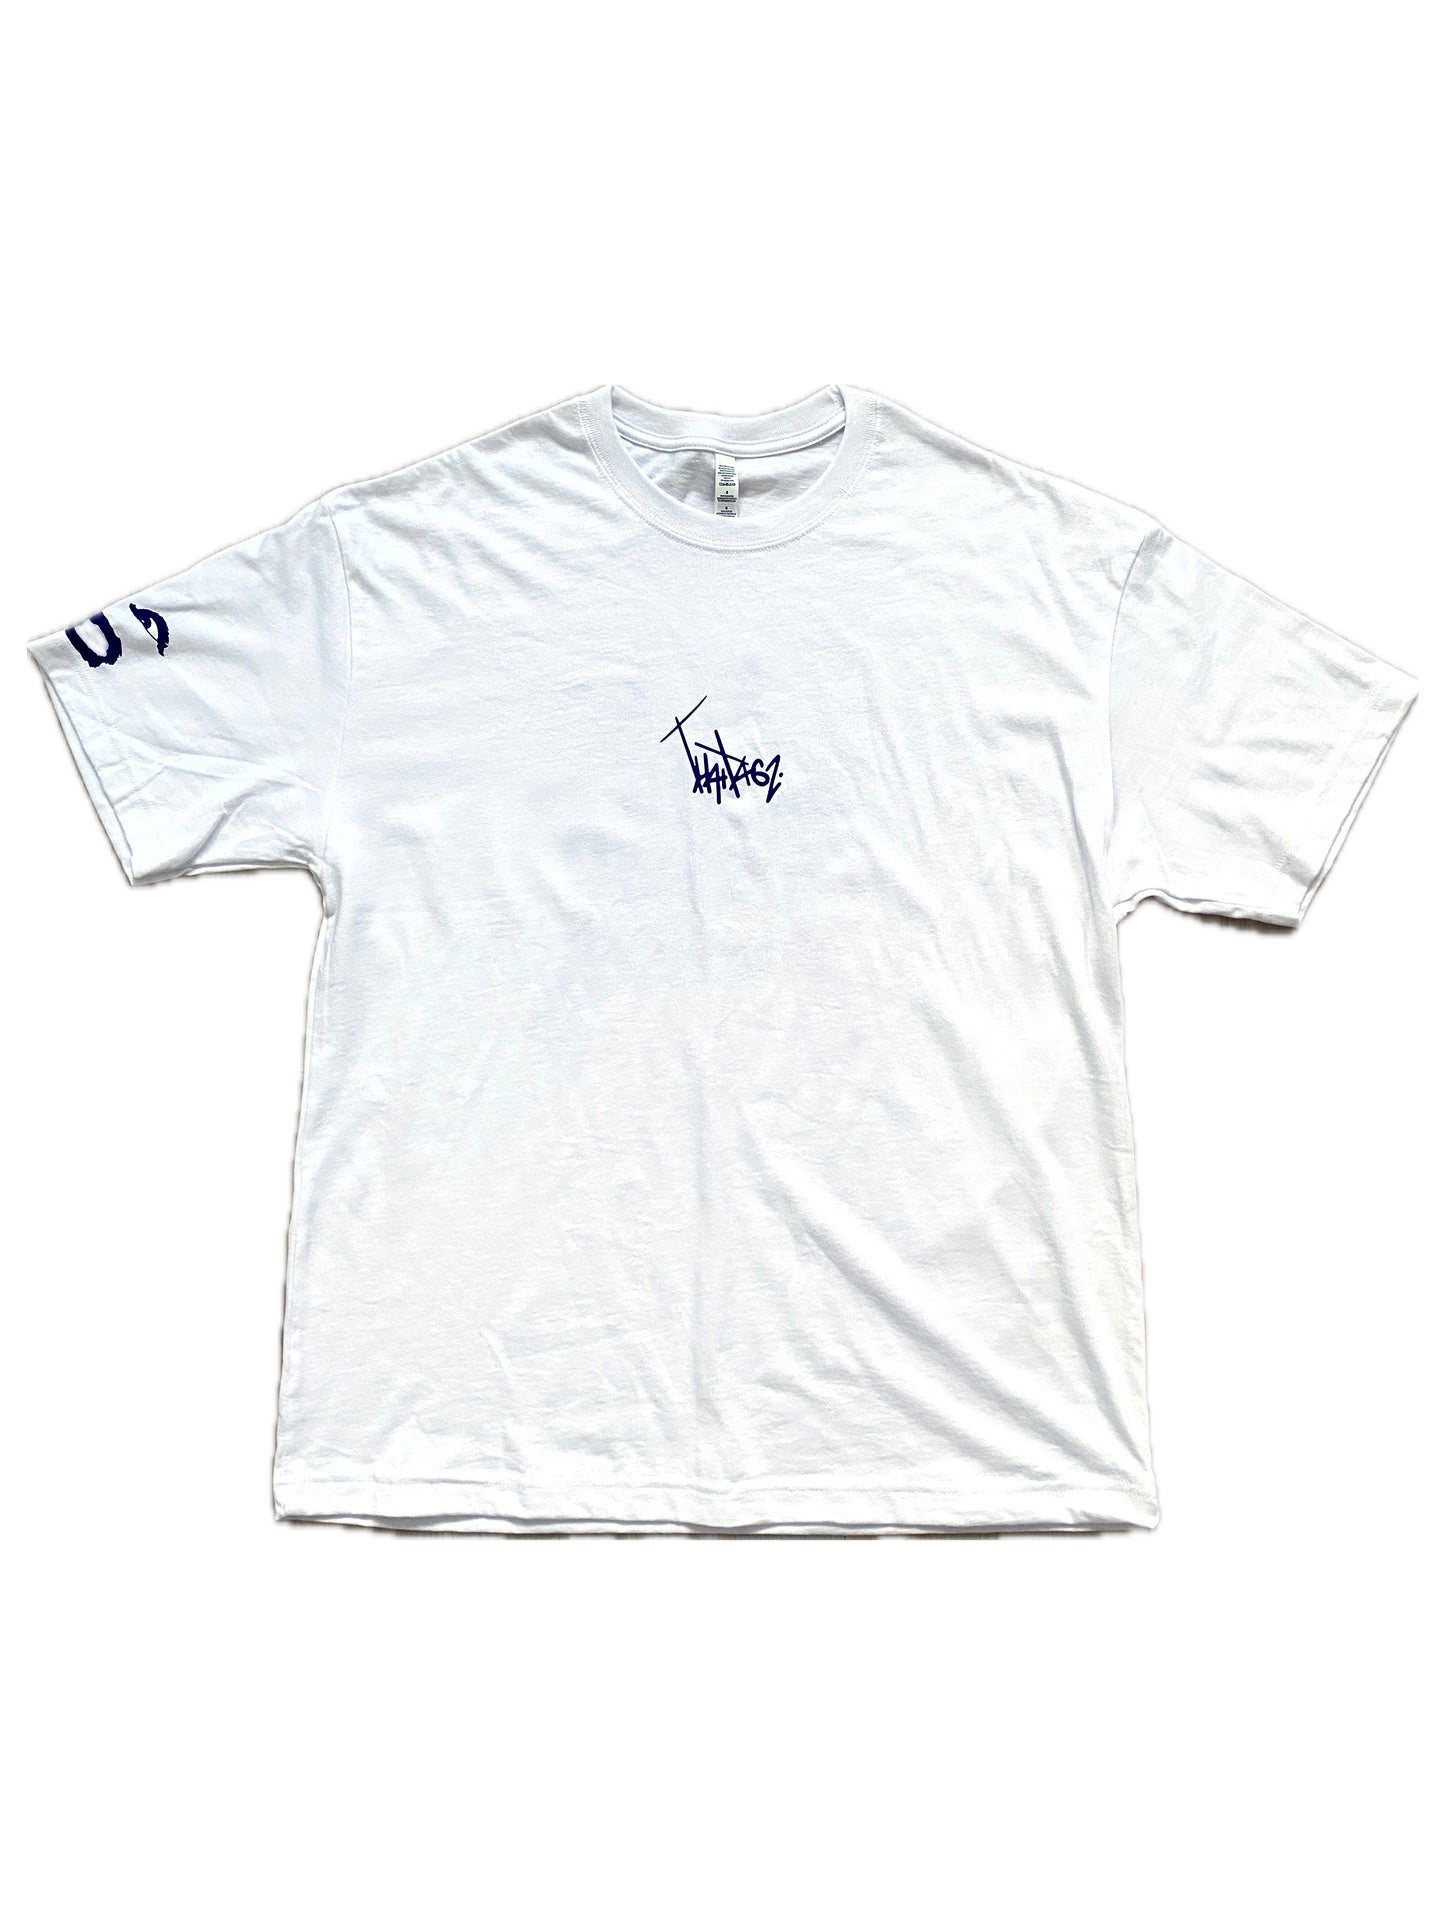 MADE IN NY tee (limited to 25)